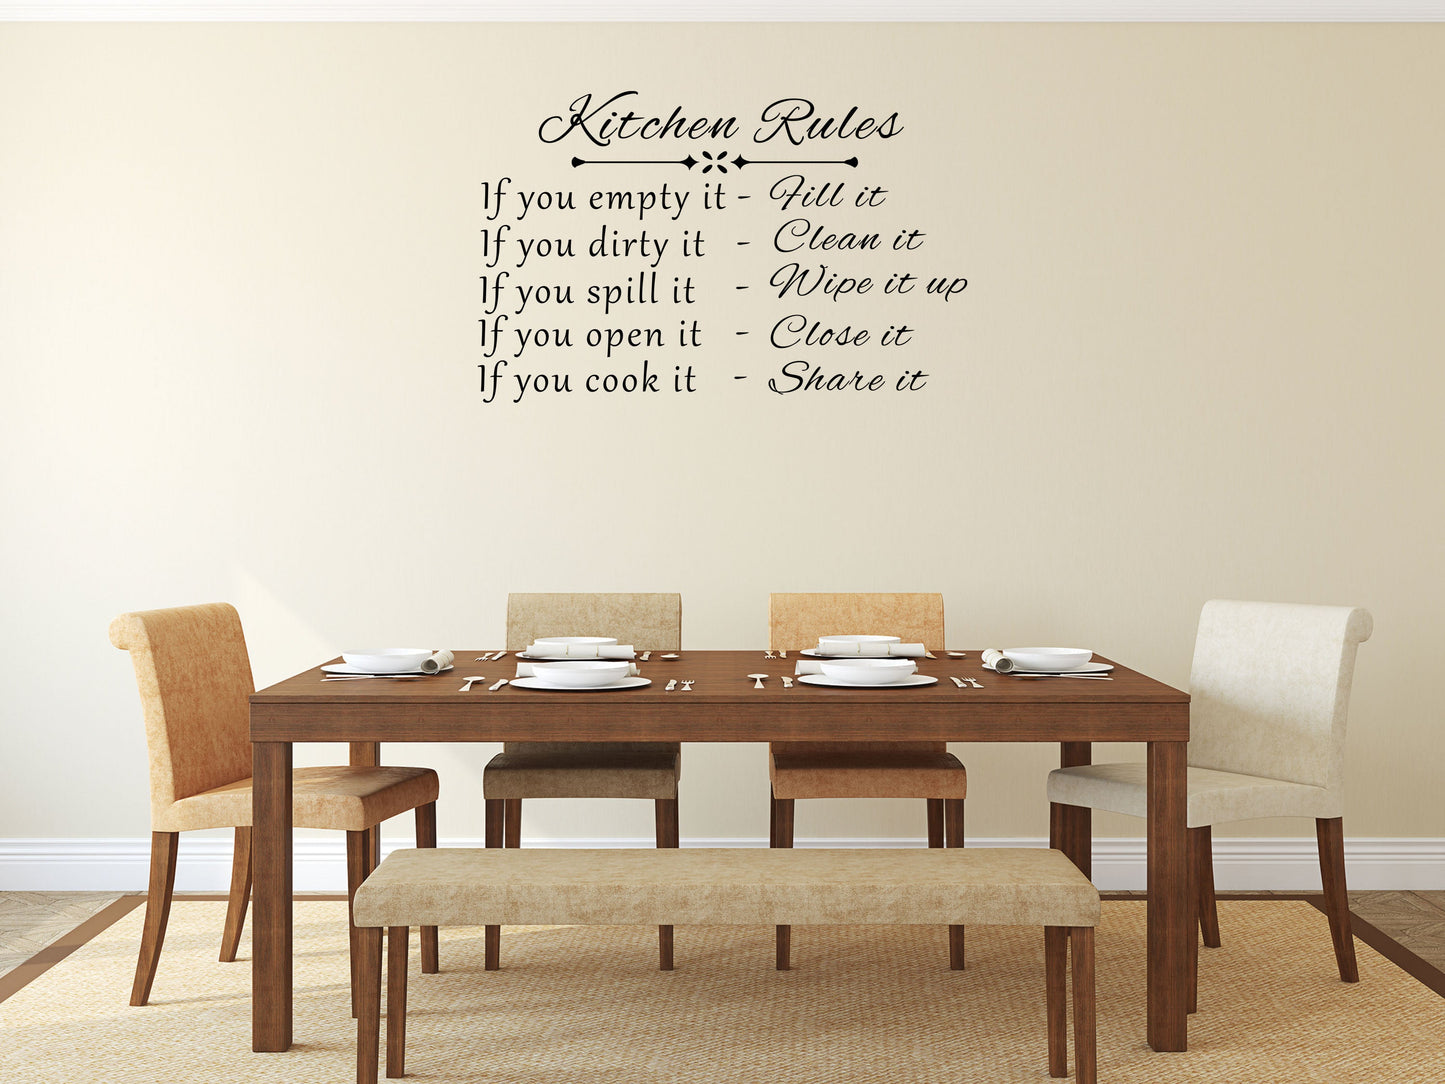 Kitchen Rules Vinyl Wall Decal Inspirational Wall Signs 